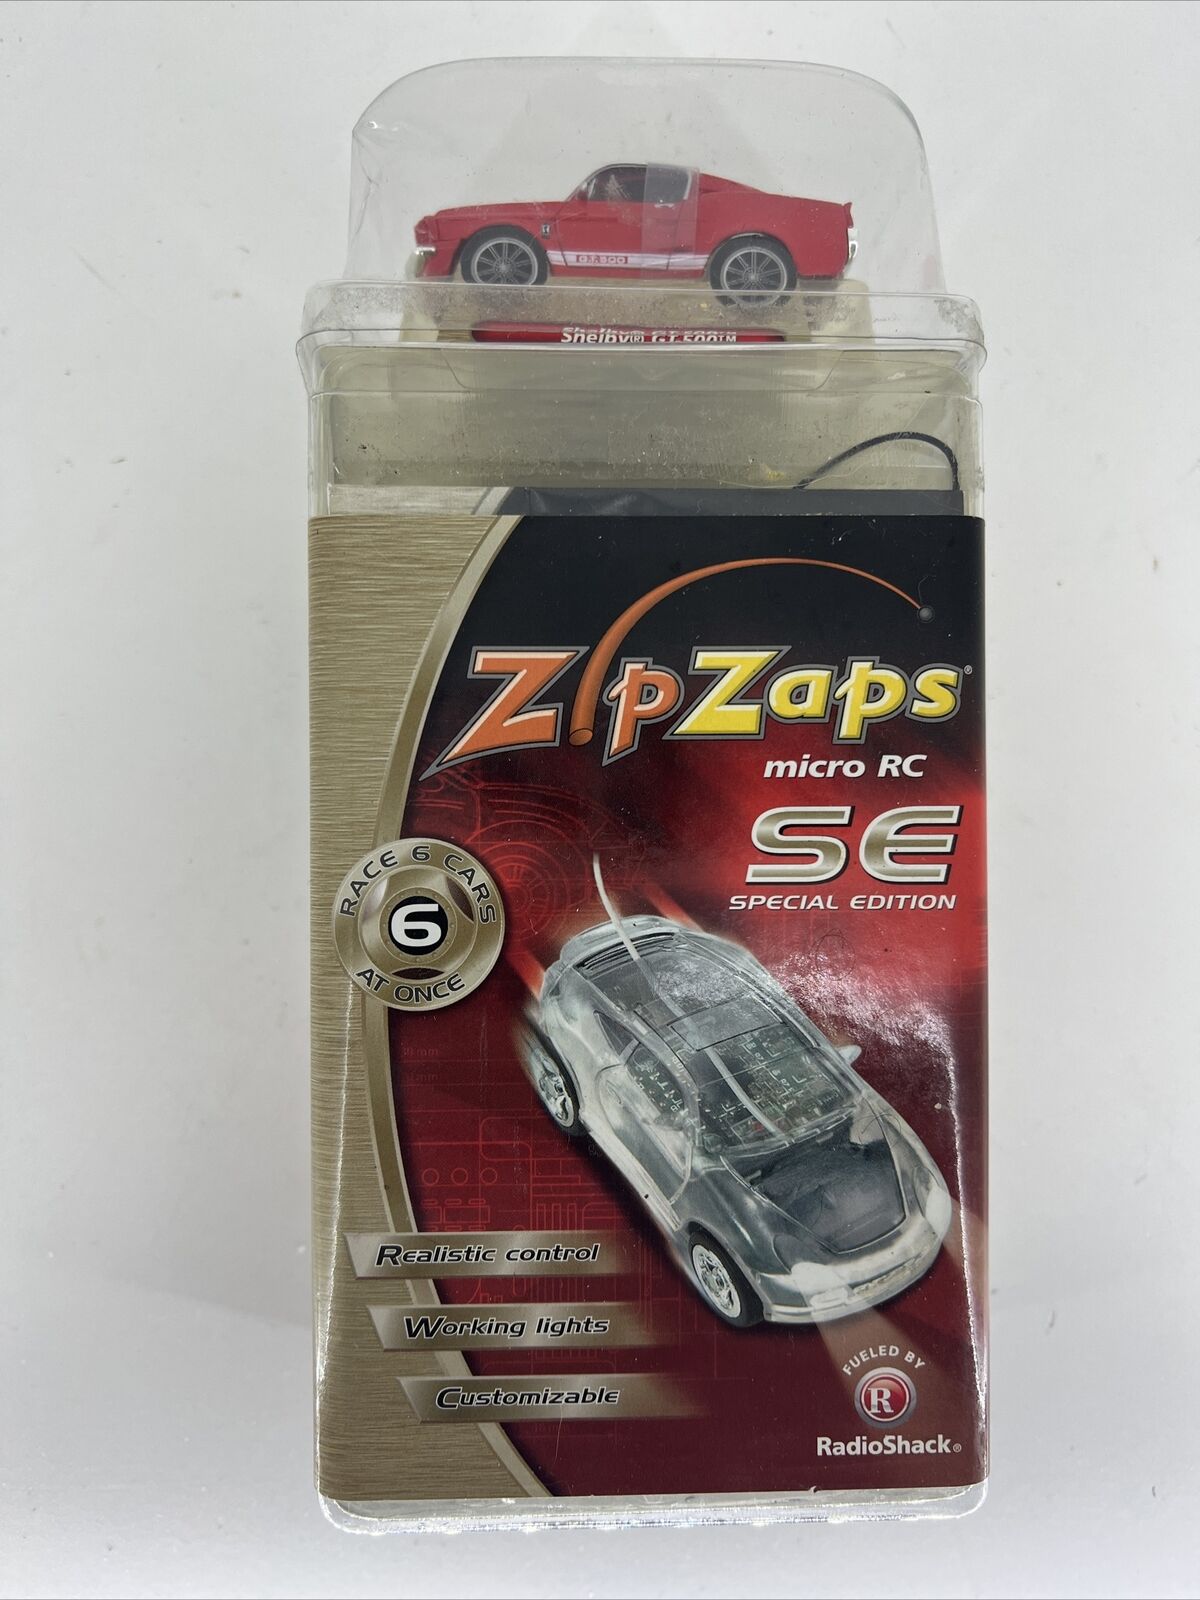 Zip Zaps Micro RC Ford Mustang Shelby GT-500 SE Spec Ed. RADIO SHACK,Sealed, NIP